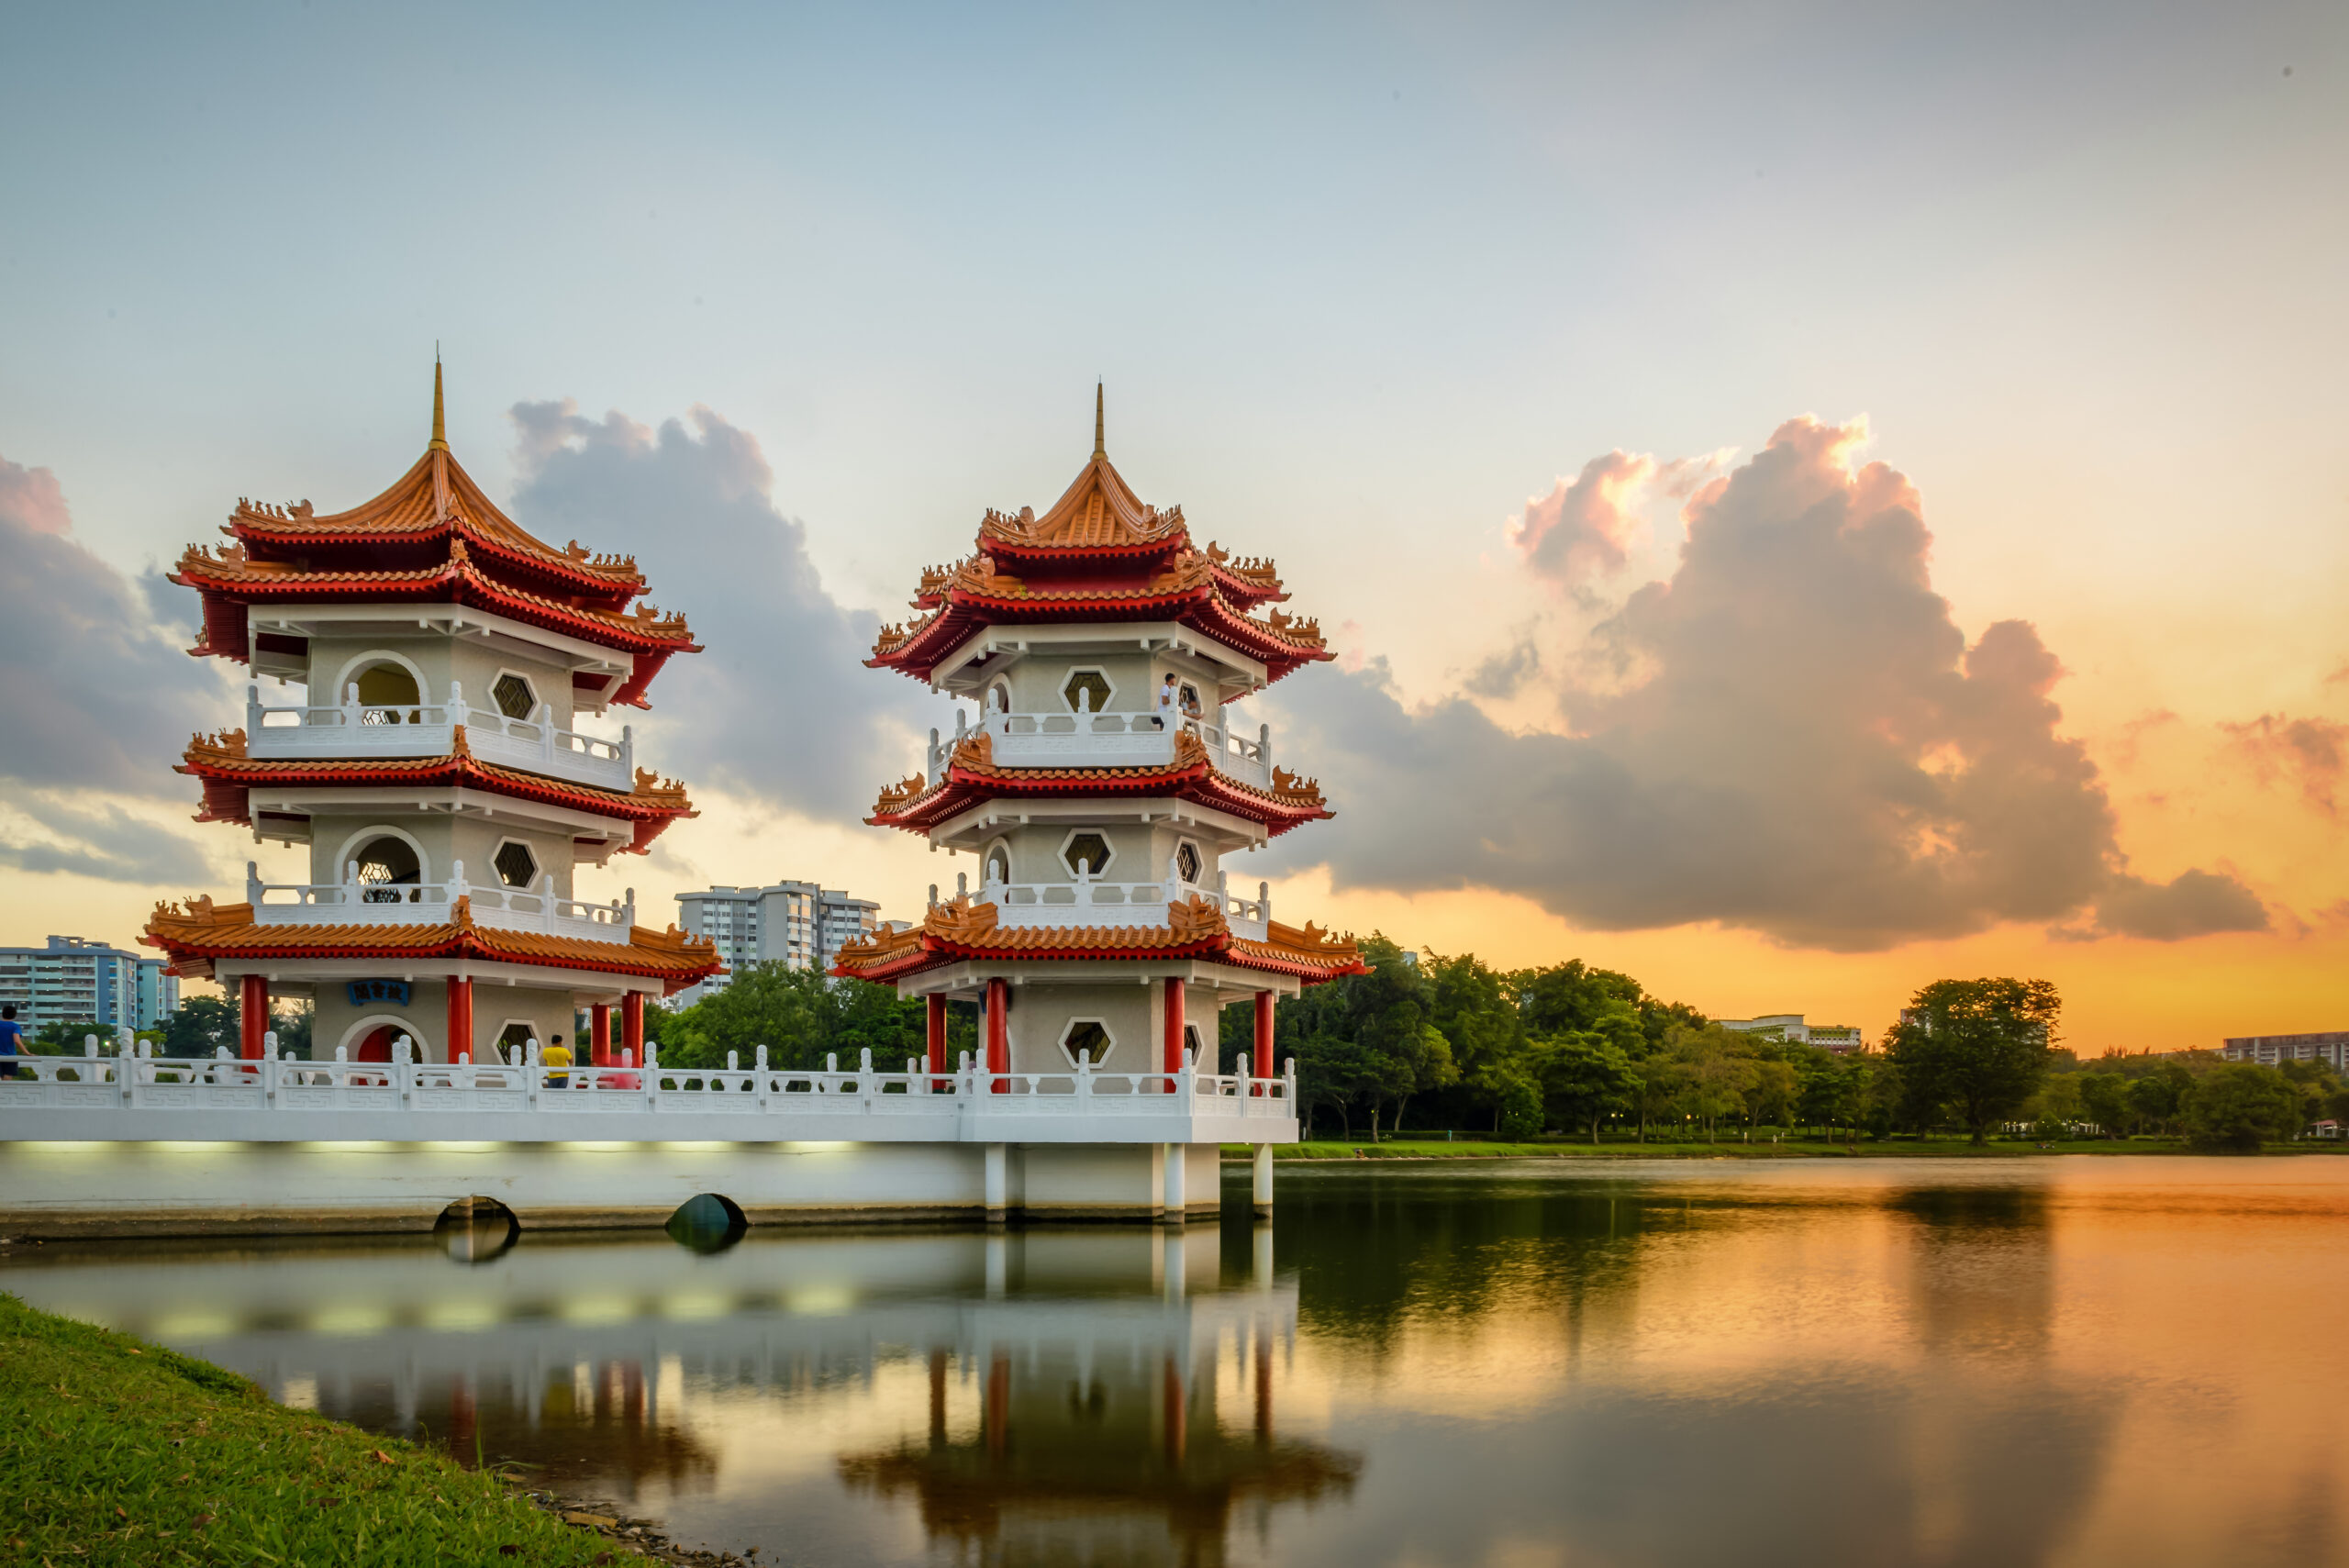 A picturesque shot of the Twin Pagodas and arresting sunset at Jurong Chinese Garden